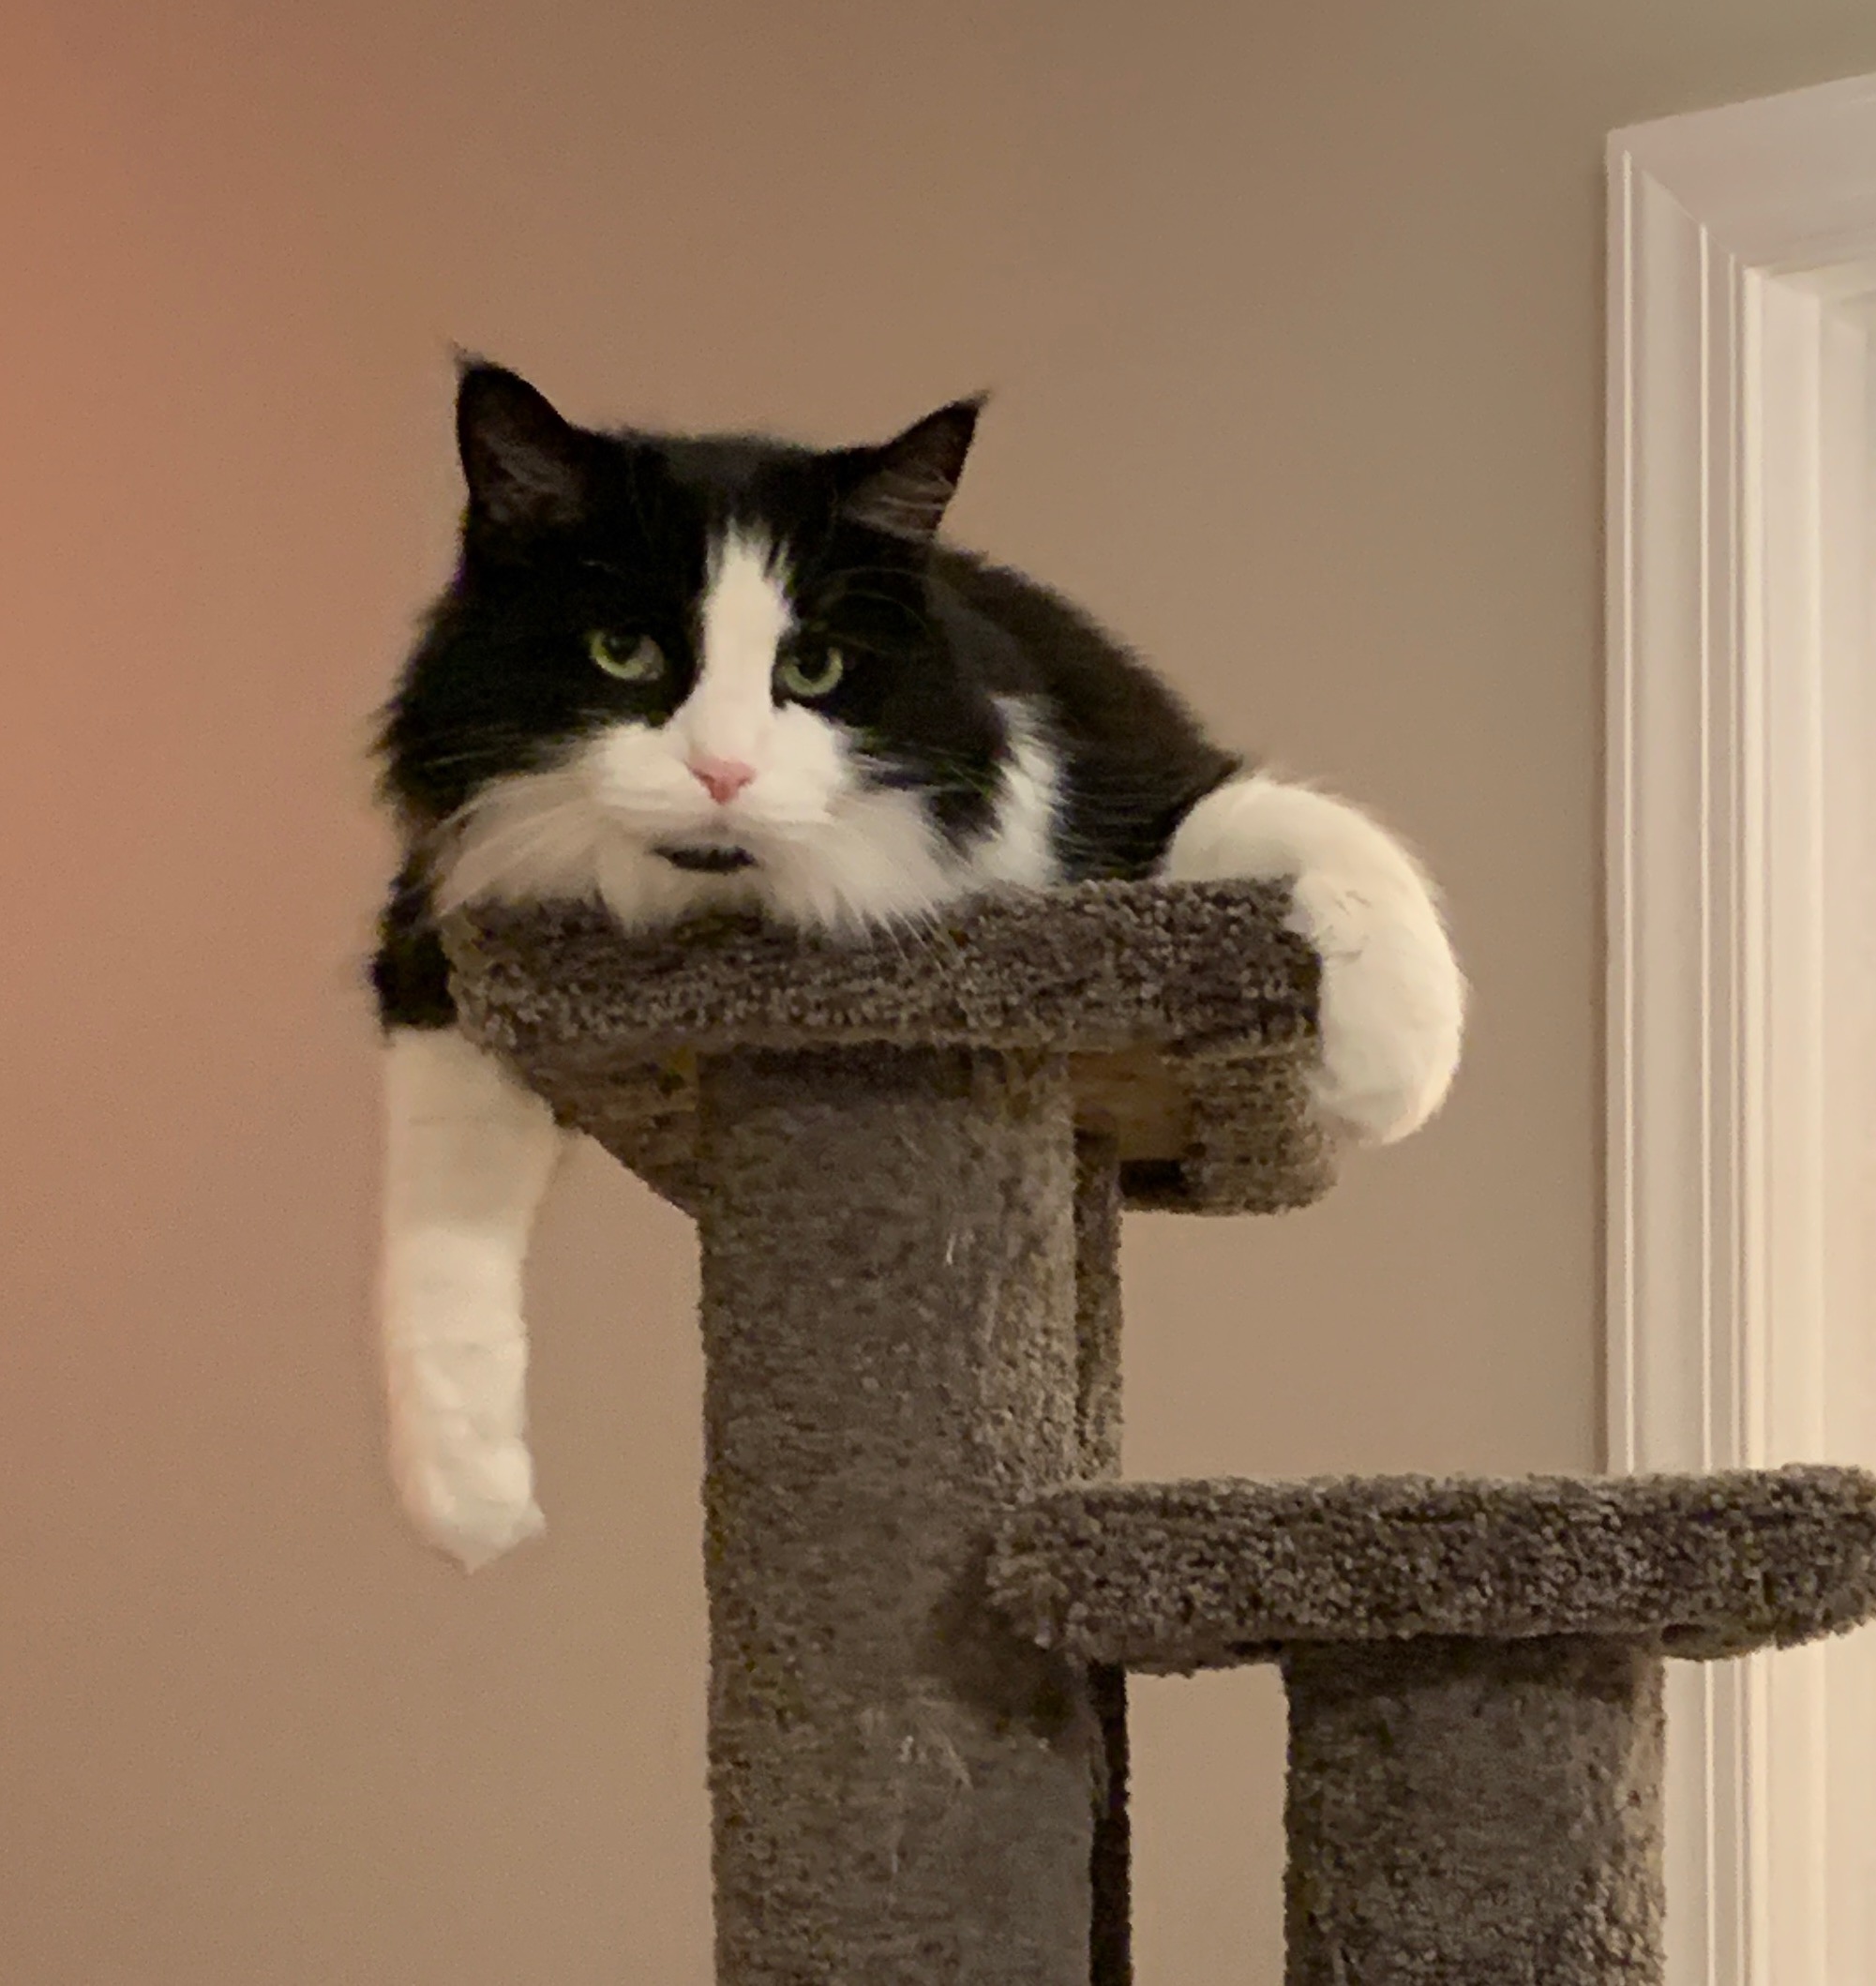 https://www.askamanager.org/wp-content/uploads/2020/09/Hank-on-cat-tree.jpeg